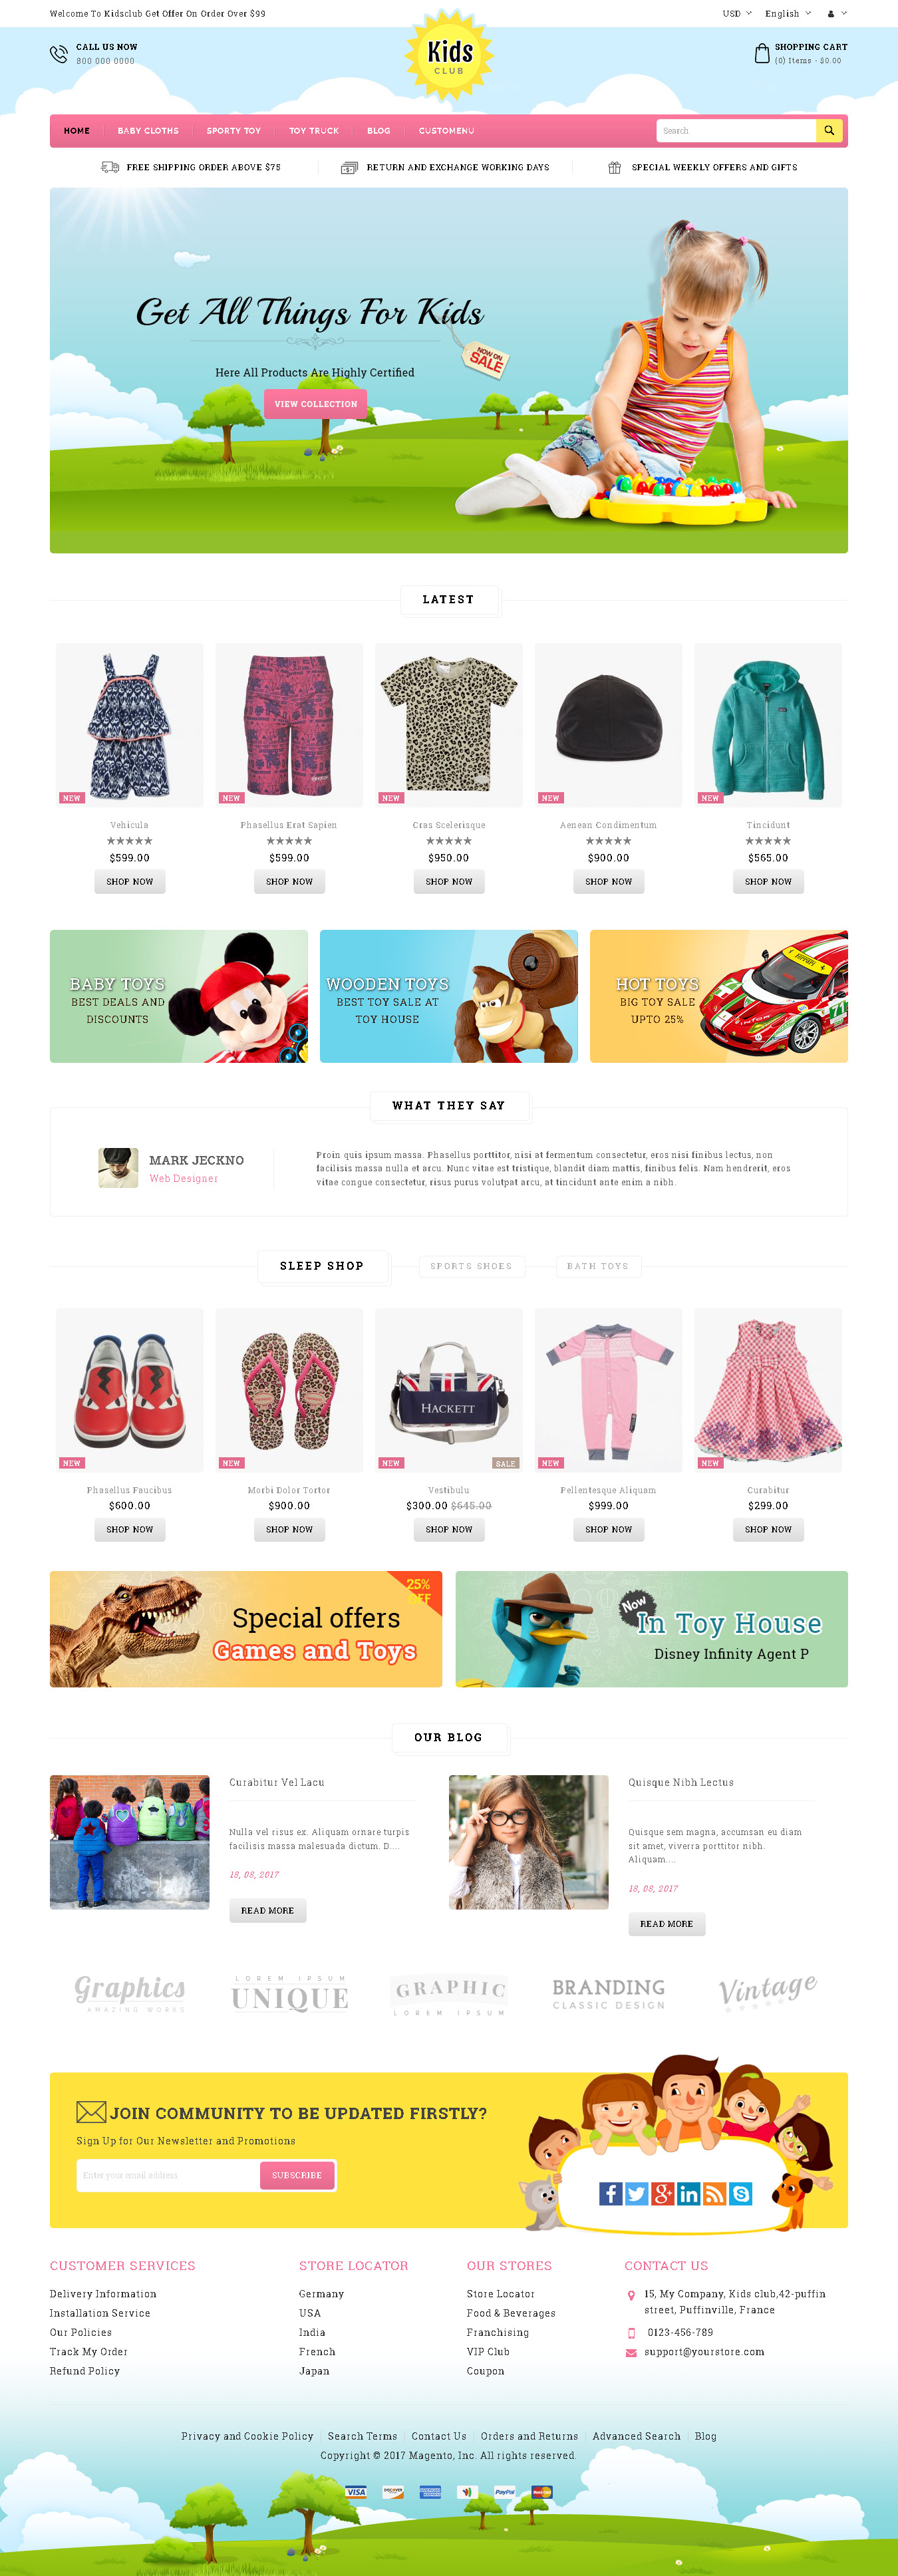 Top magento themes for kids store - Kids Club - Responsive Magento 2 Theme